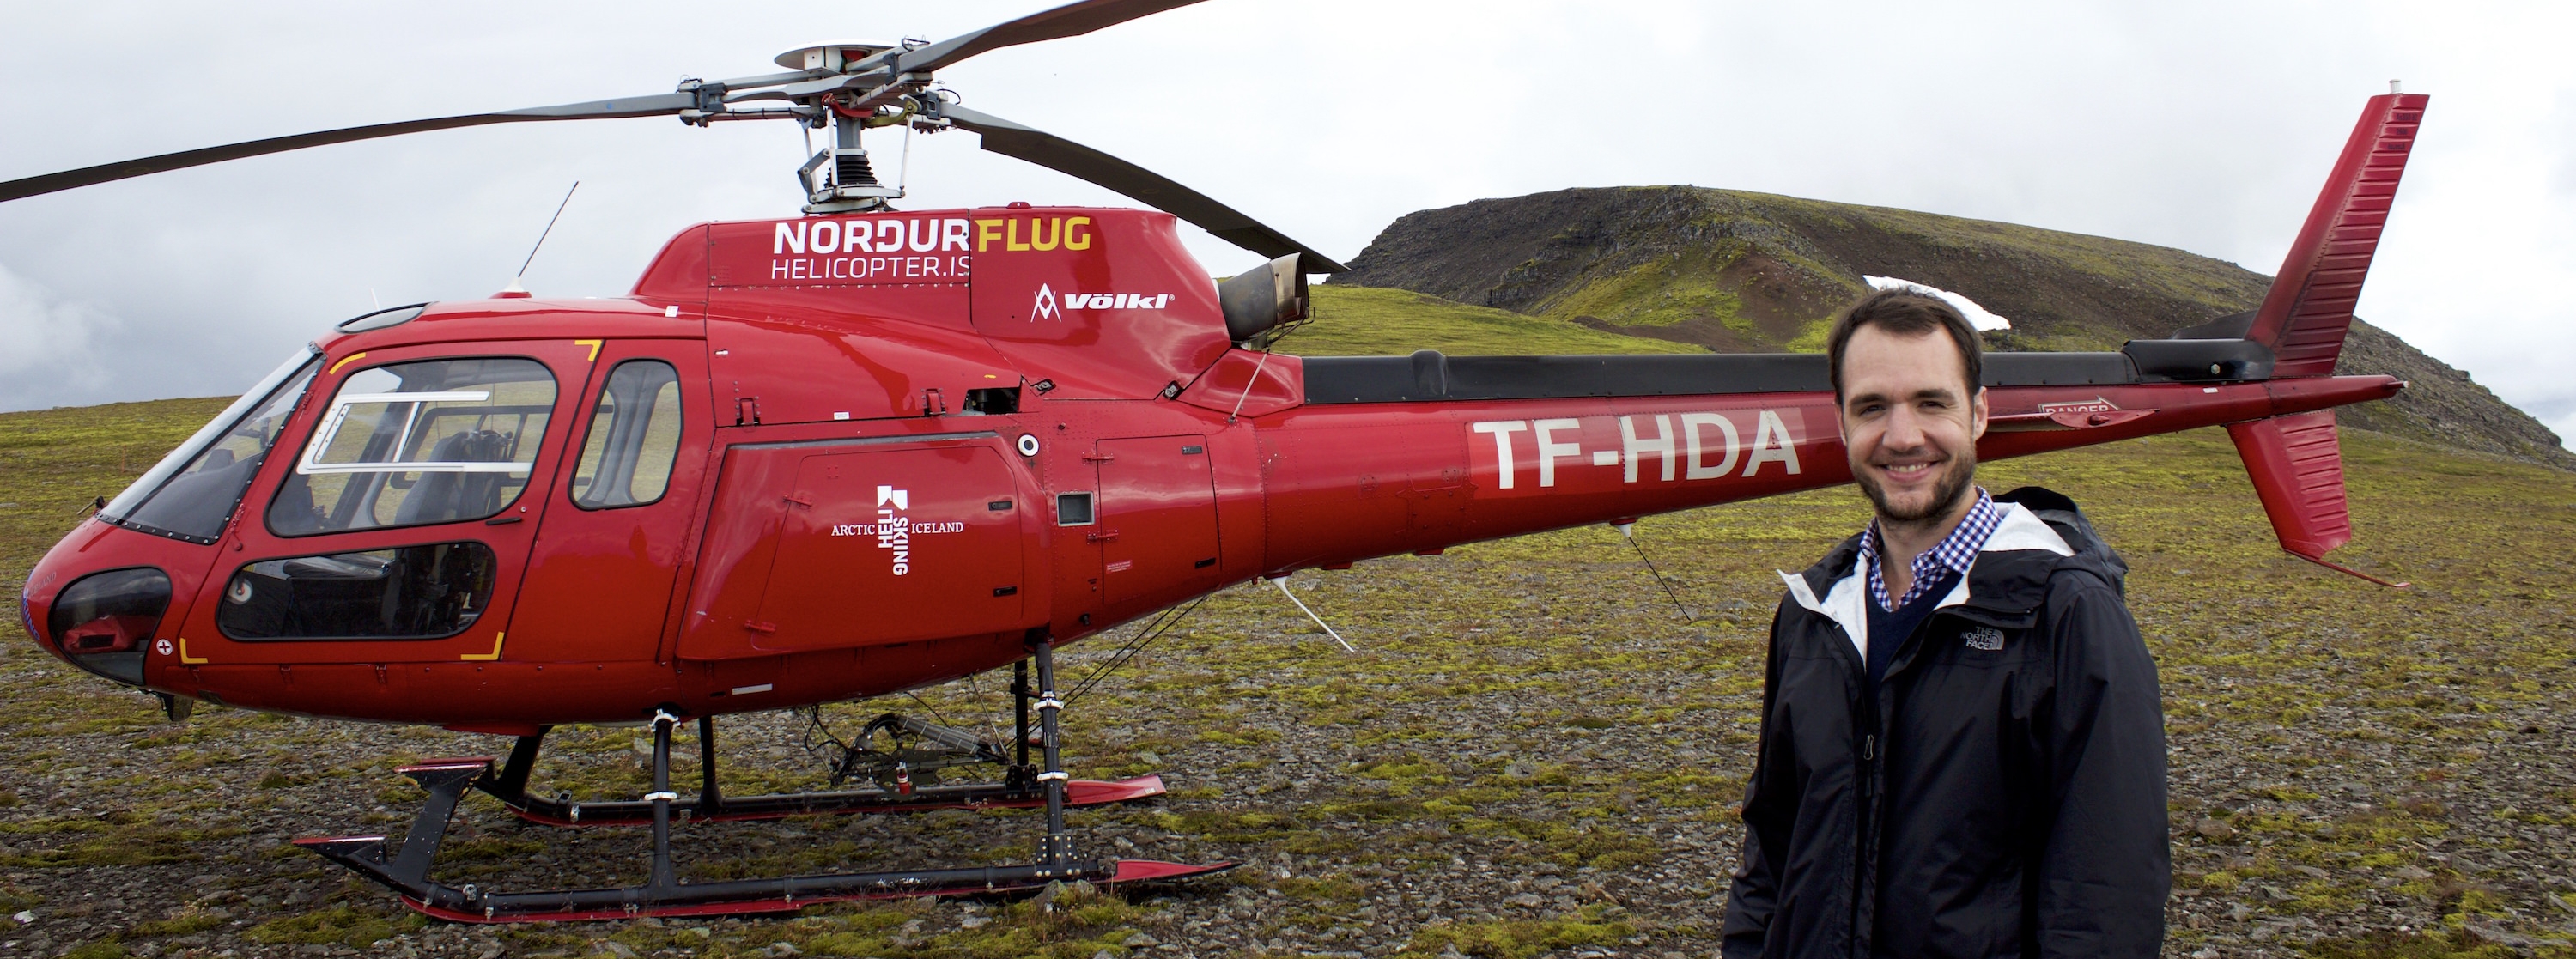 Iceland Helicopter - Why Travel - Authentic Traveling